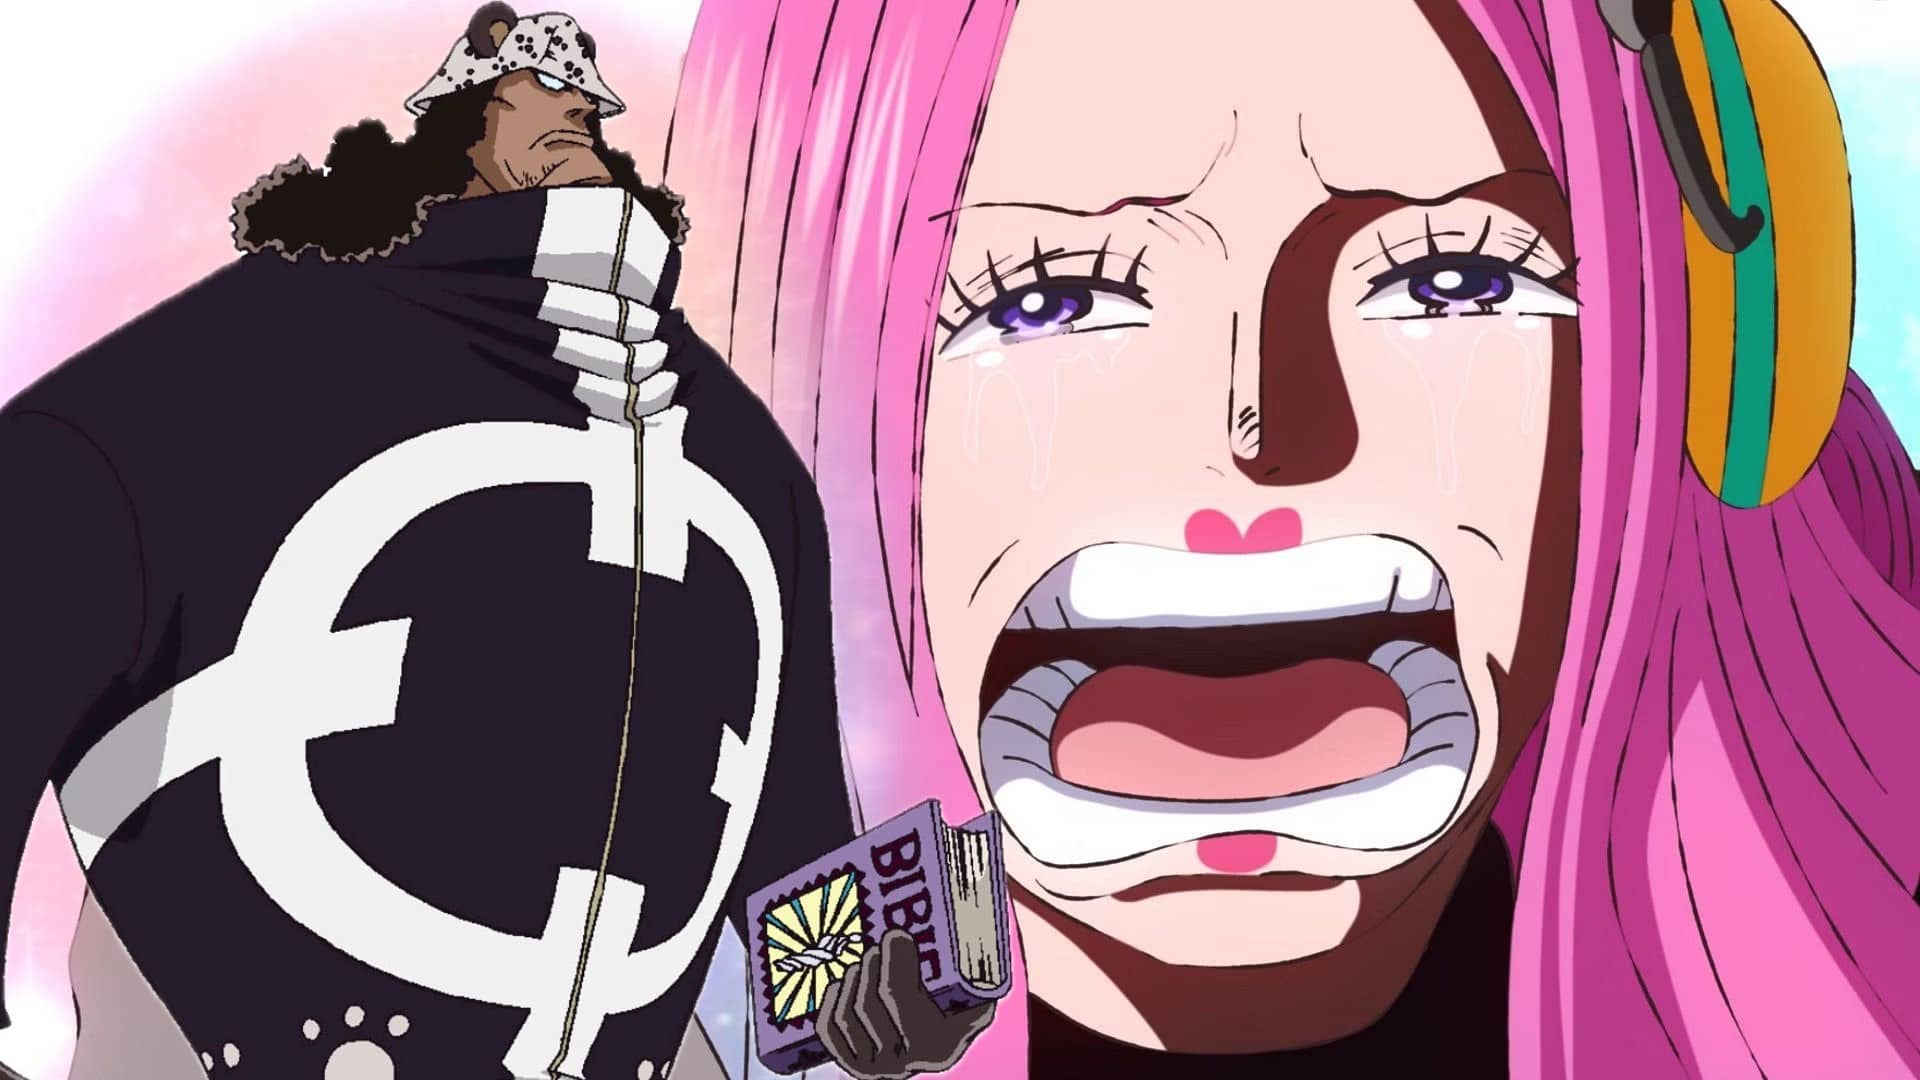 One Piece Theory Suggests Eiichiro Oda Plans Characters' Major Weaknesses